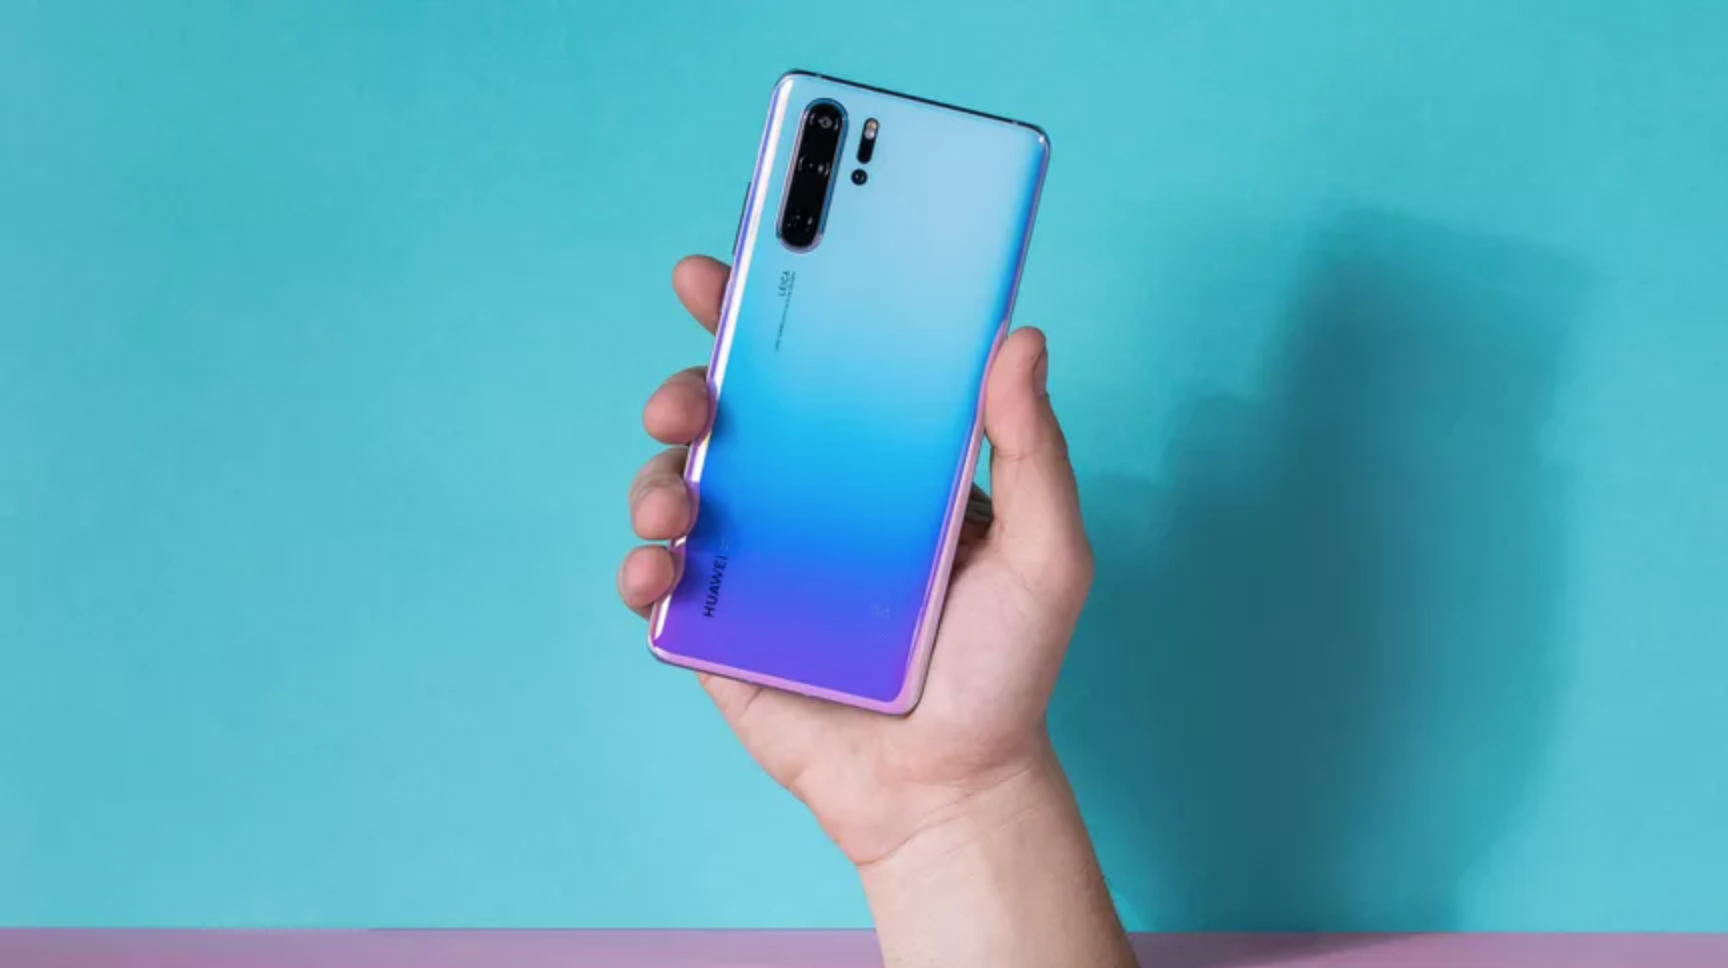 Behind the Controversy: Huawei Users Speak